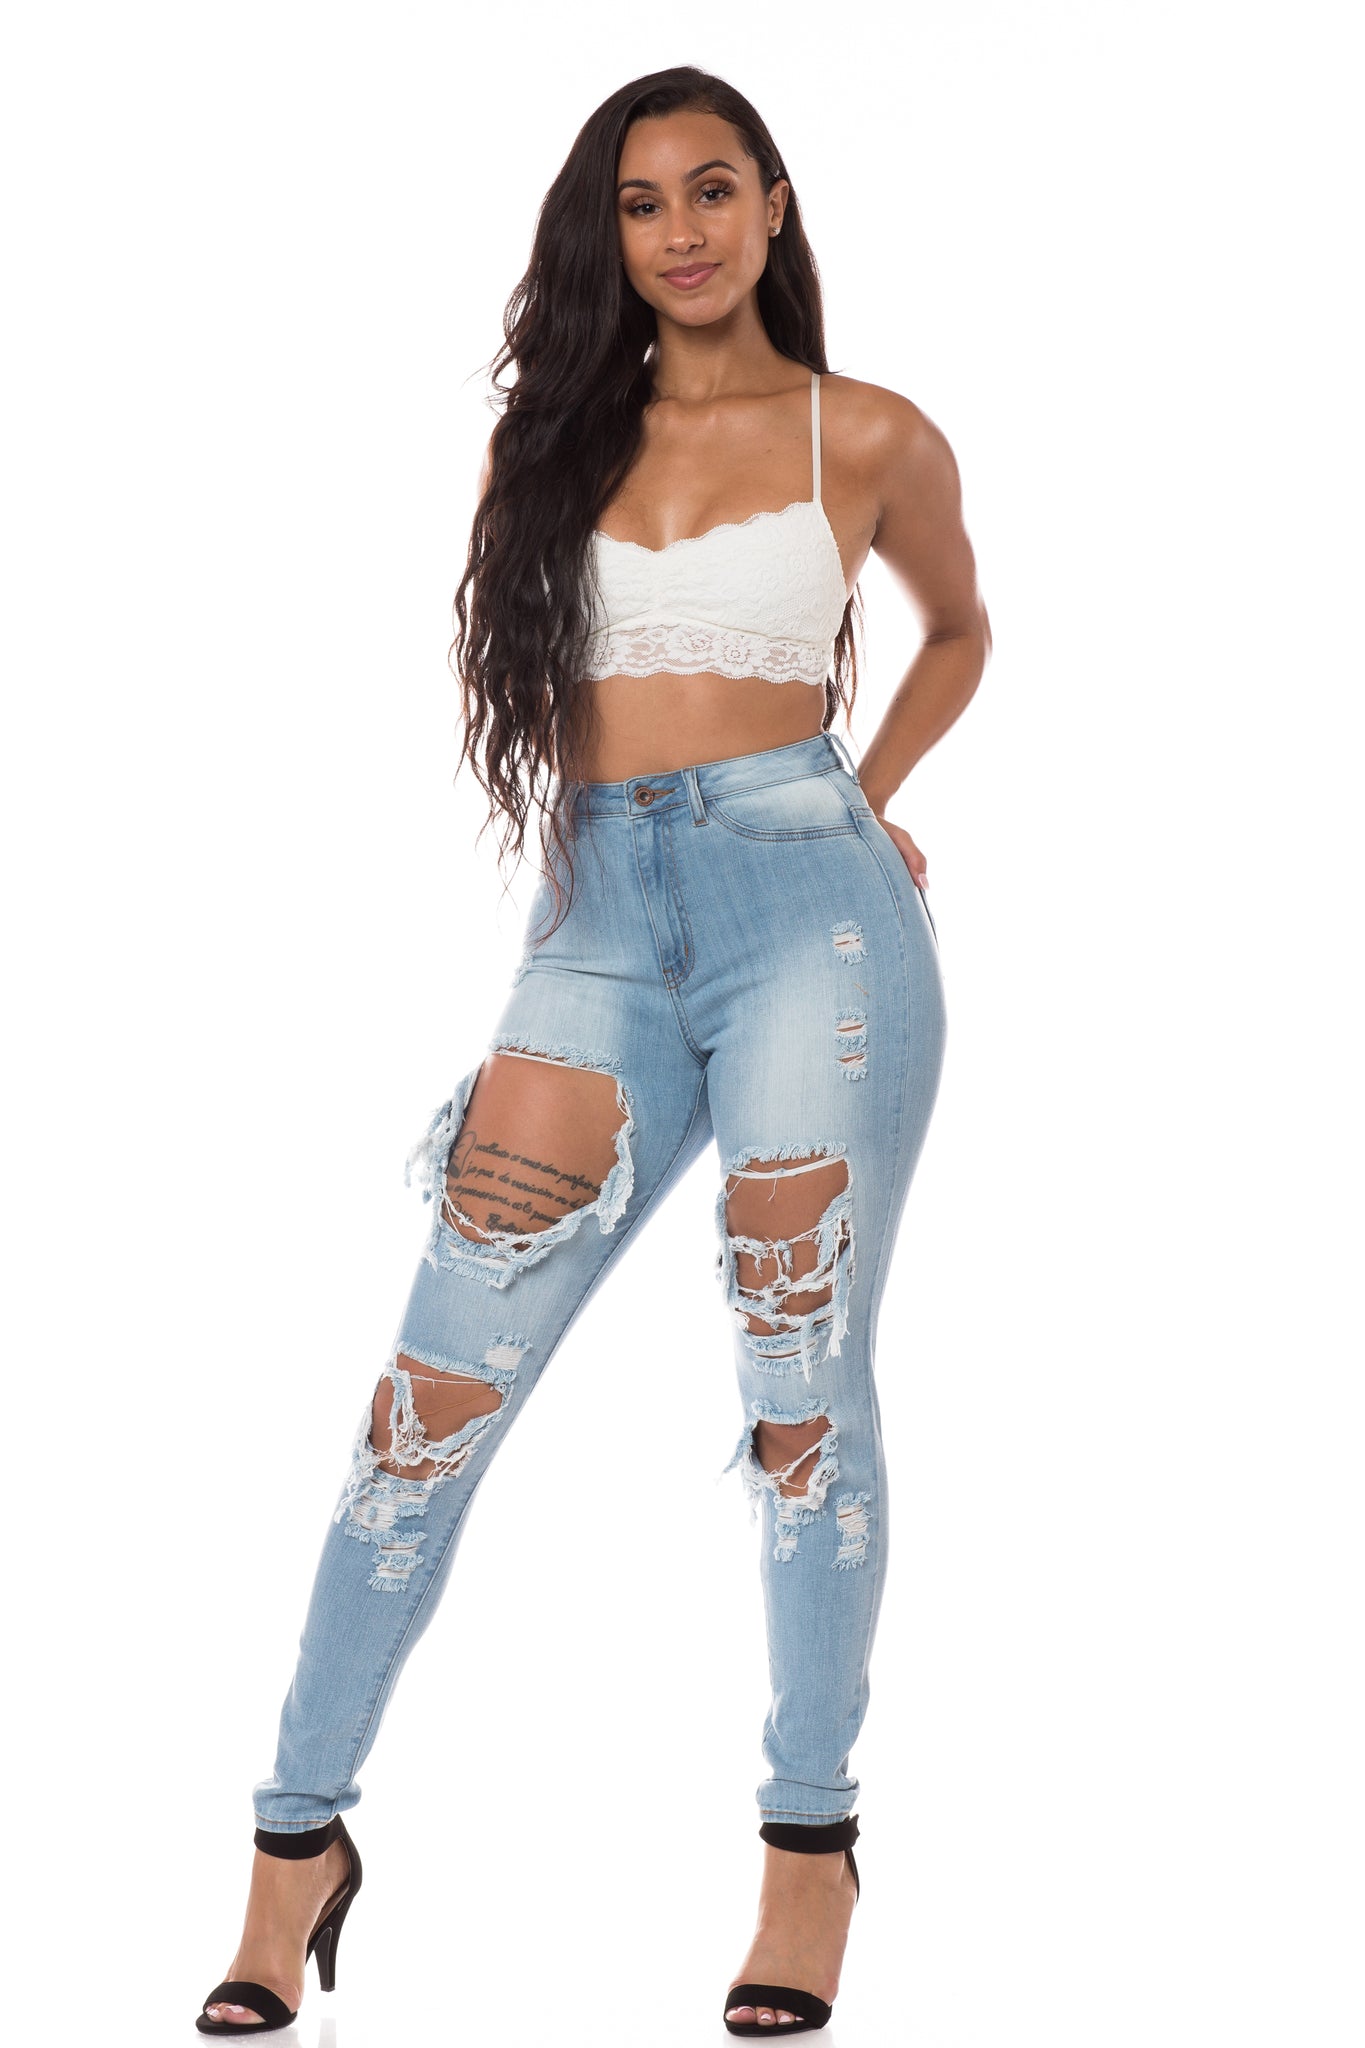 Bree - Blue High Waisted Ripped Skinny Jeans, Jeans